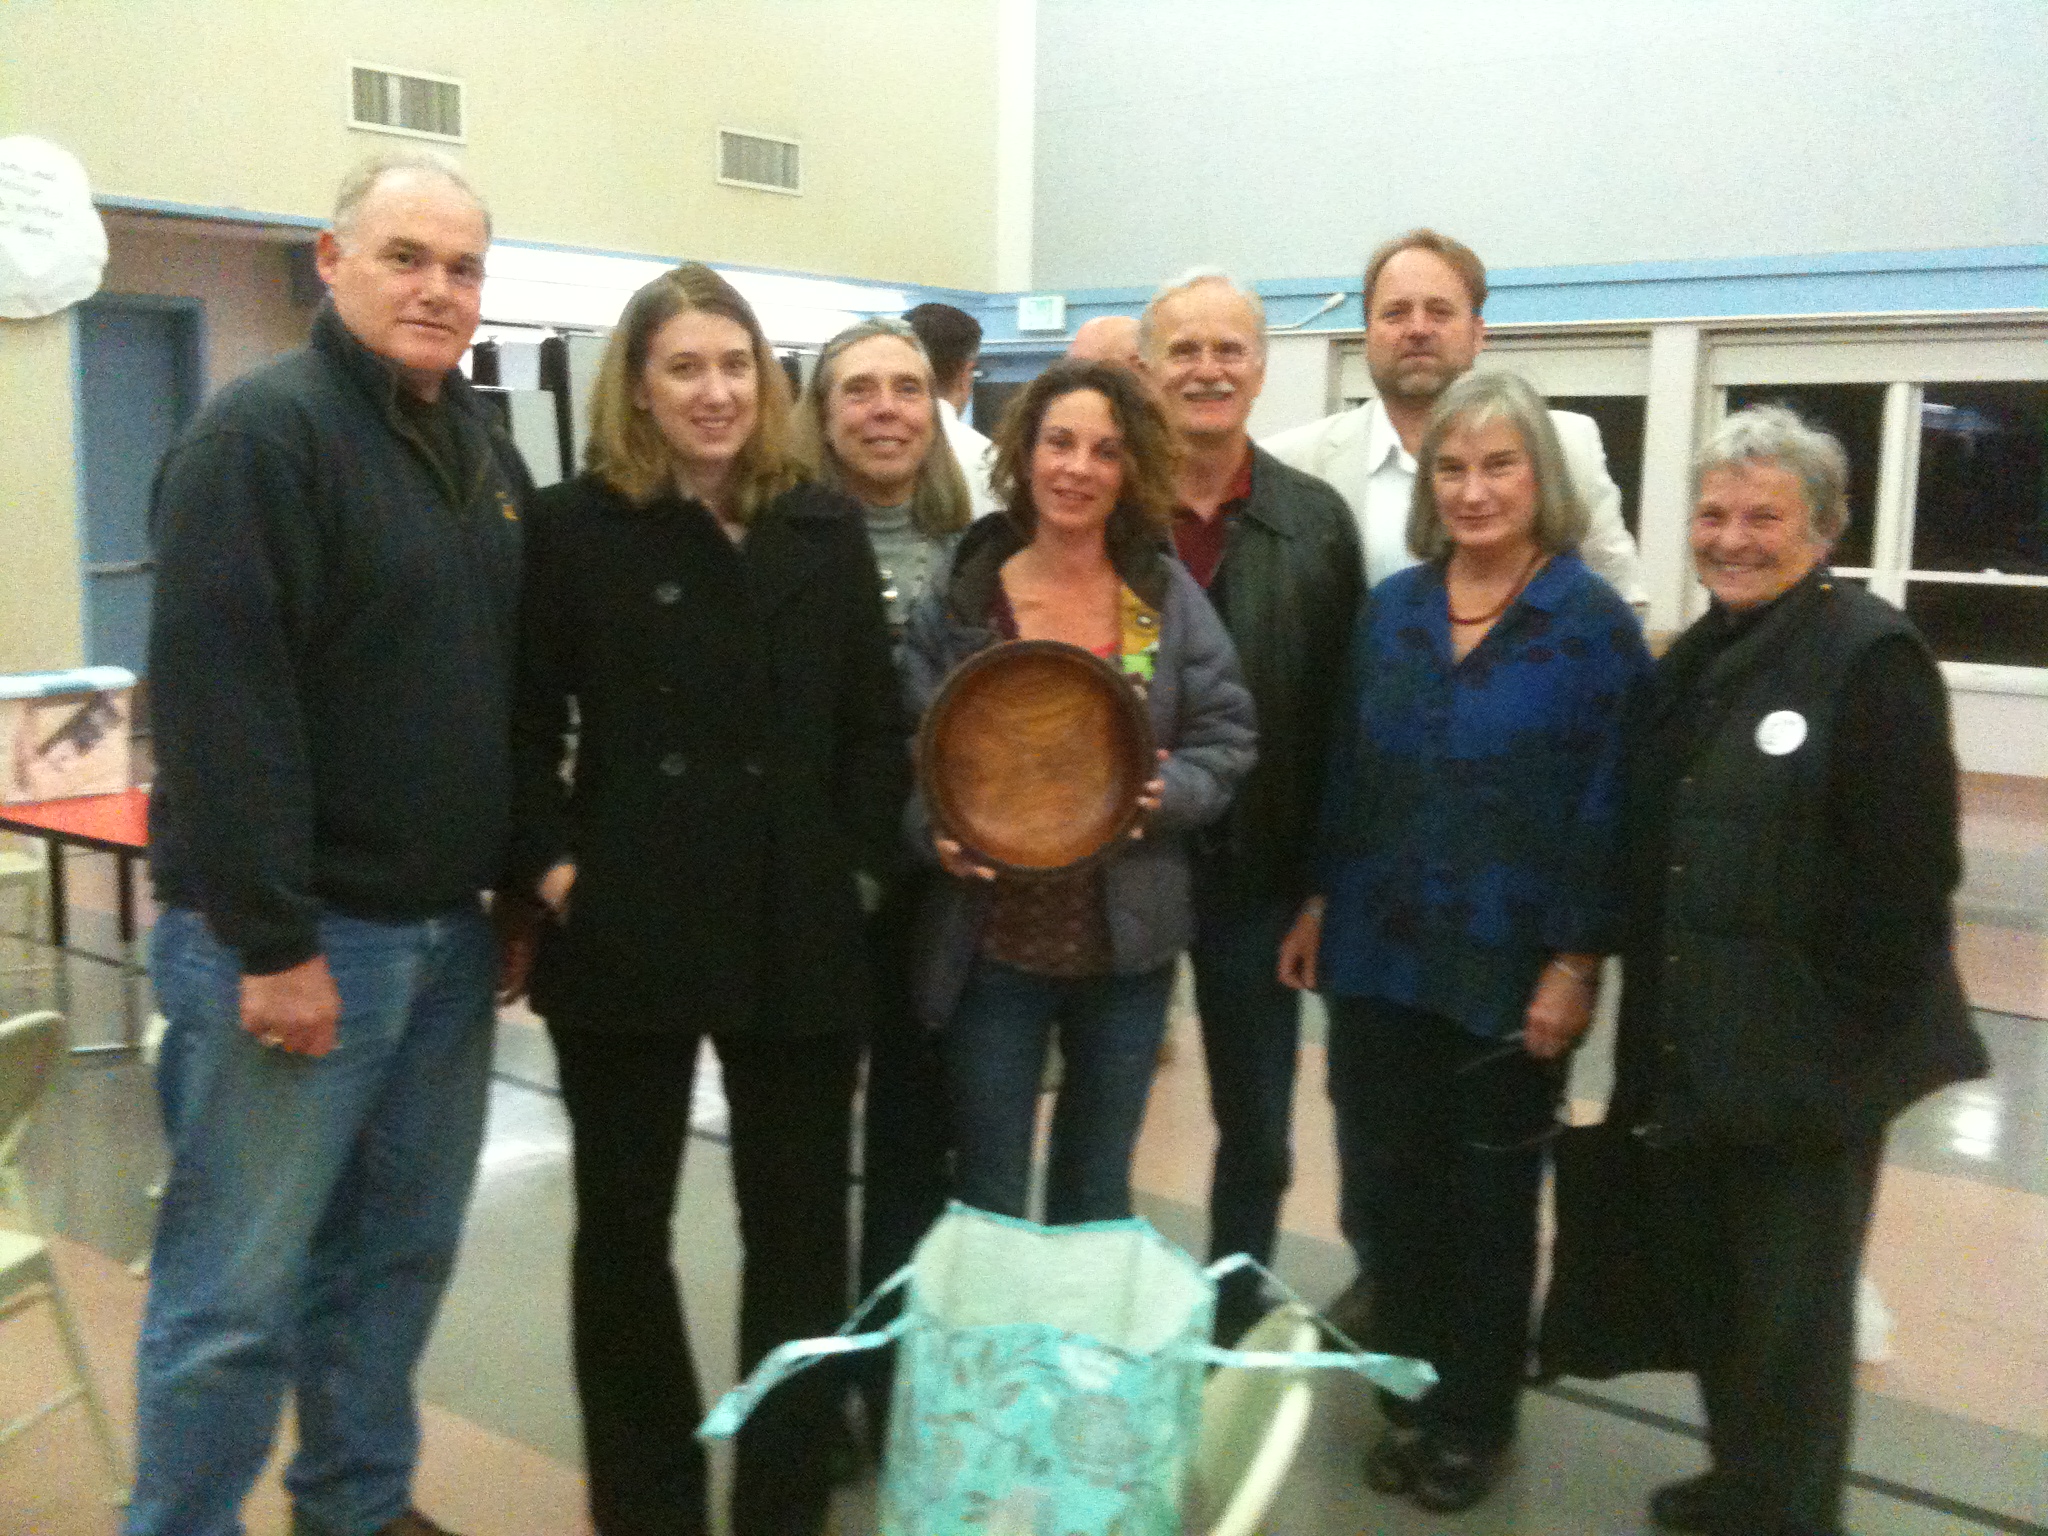 Elaine Estrada (center with bowl made by Brad Adams) graduates from her year of service as the Benicia Tree Foundation founding Board President. She is pictured here with (left to right) Steven Goetz, Jessica Walsh-Krenicki, Alison Fleck, Elaine Estrada, Larry Lamoreux, Wolfram Alderson, Marilyn Bardet, and Bonnie Weidel.